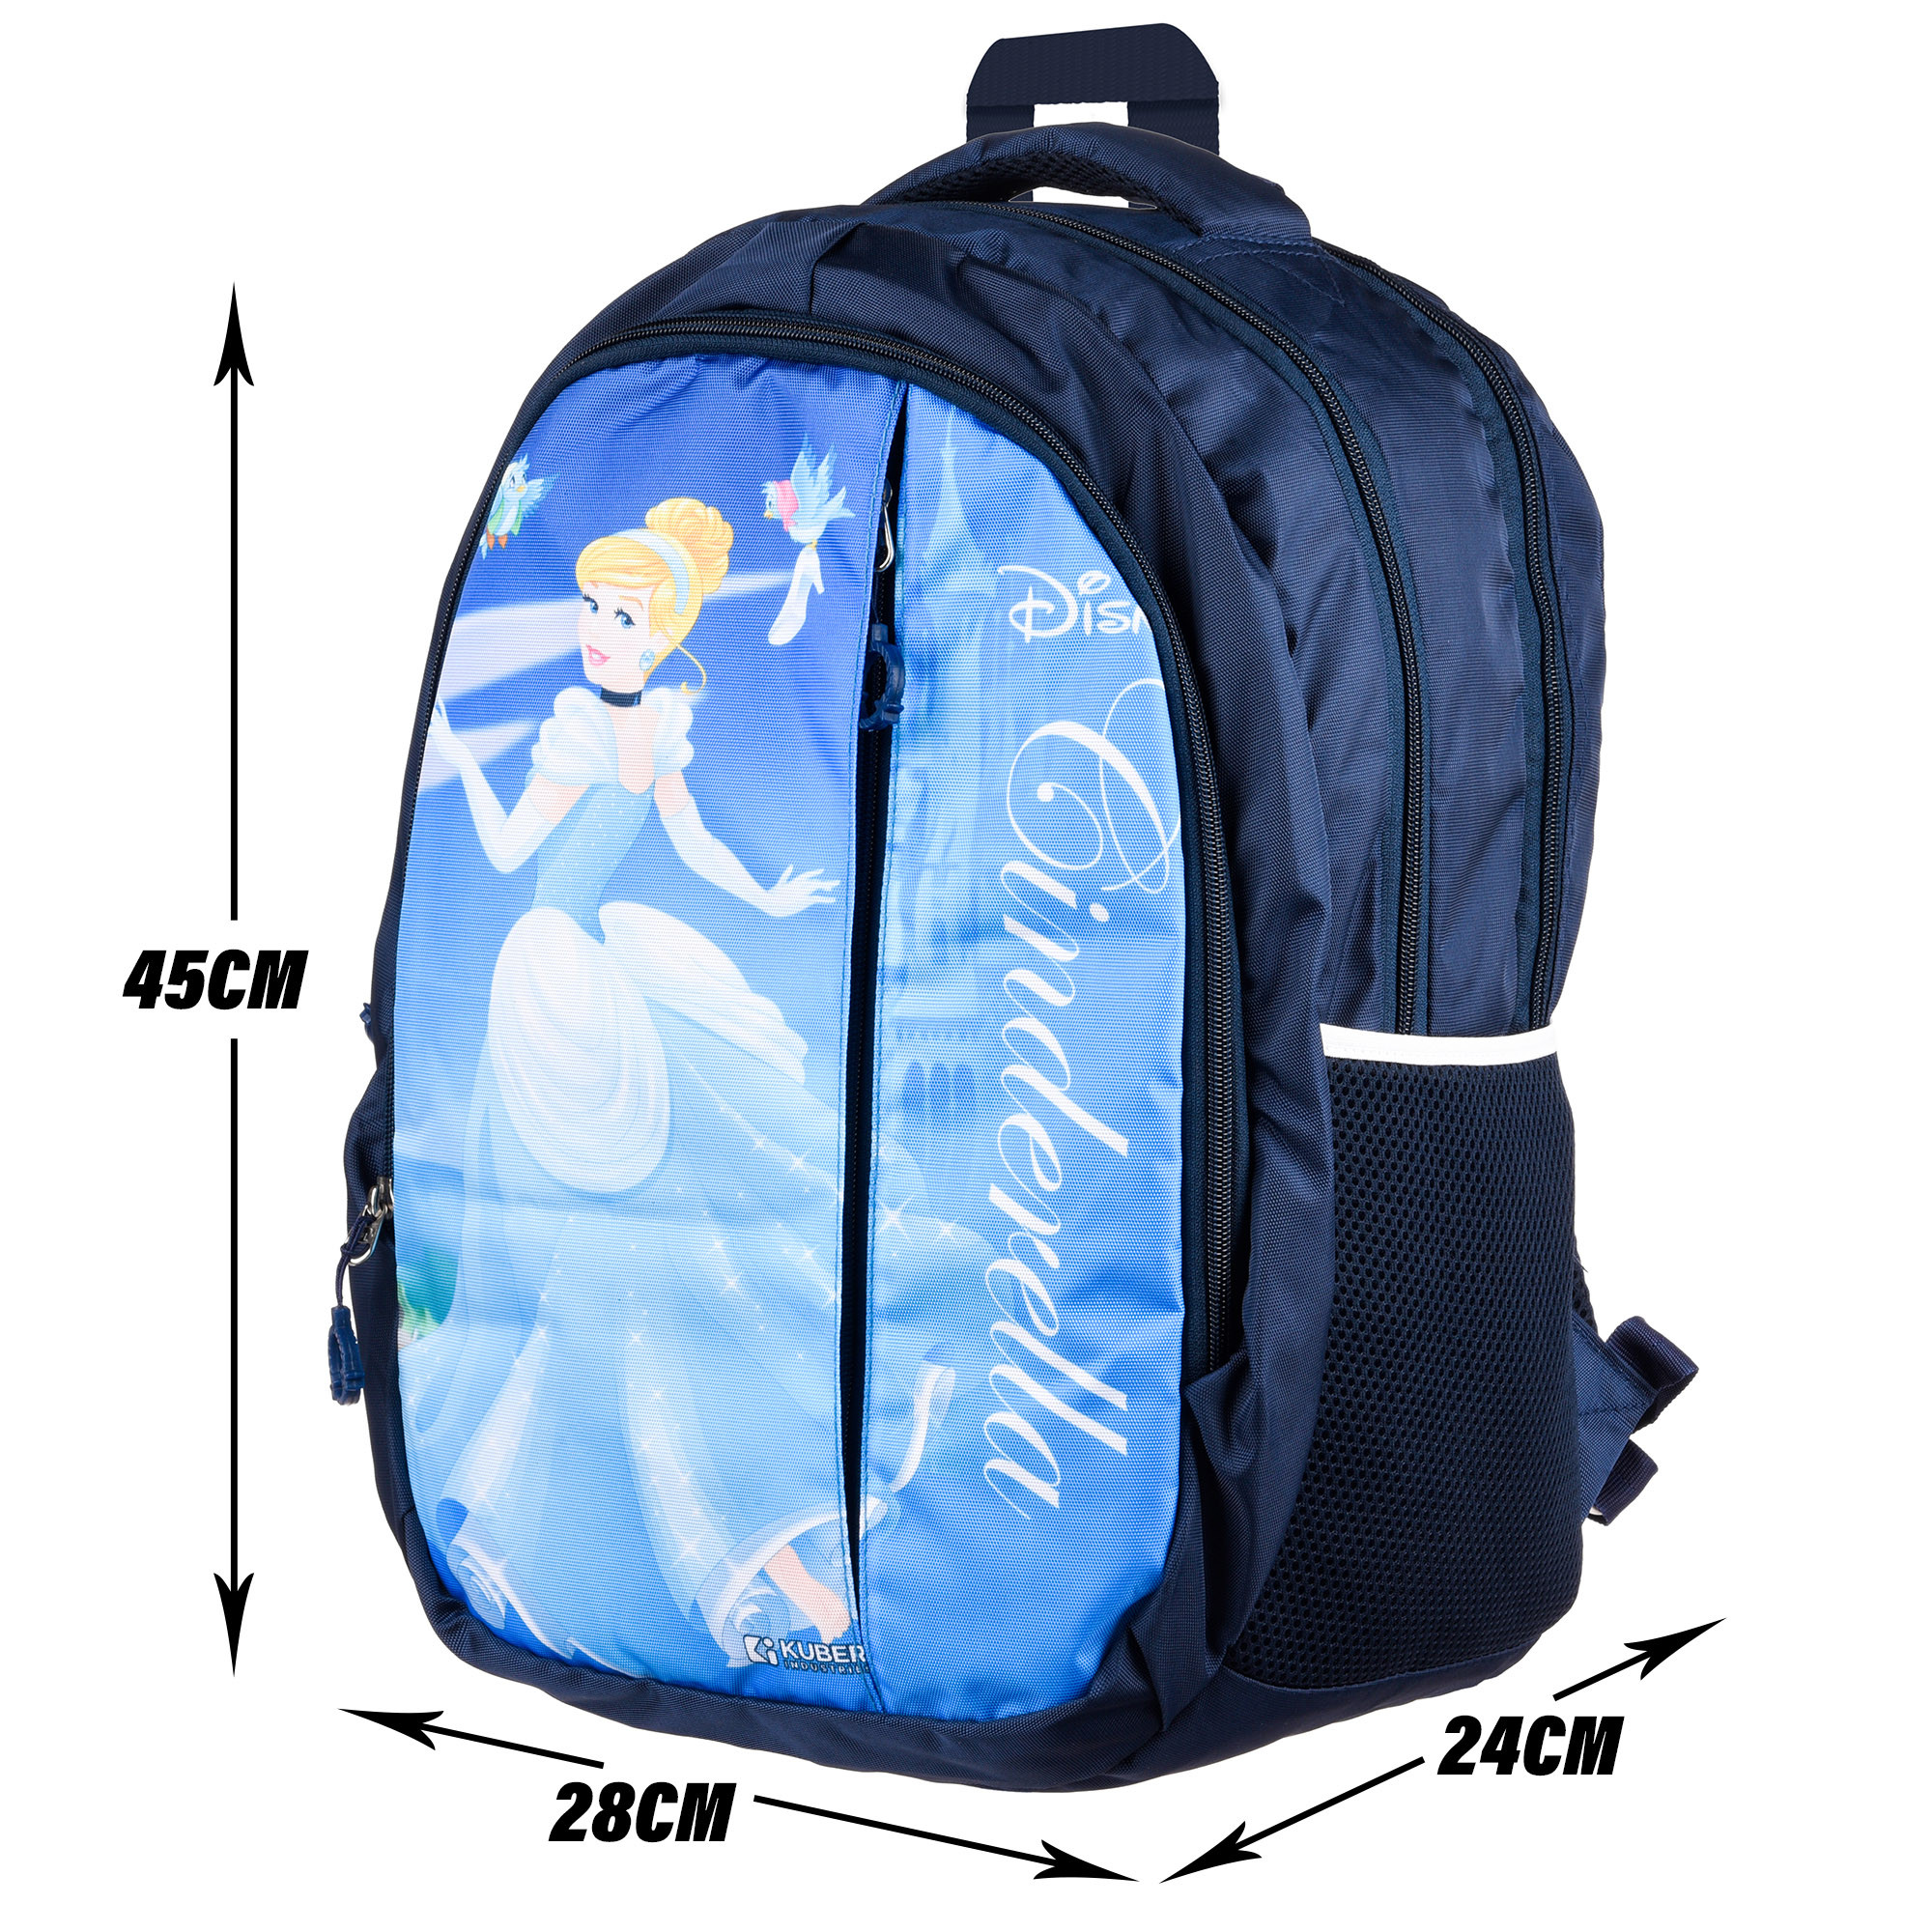 Kuber Industries Disney Cinderella School Bags | Kids School Bags | Collage Bookbag | Travel Backpack | School Bag for Girls & Boys | School Bag with 5 Compartments | Include Bag Cover | Blue